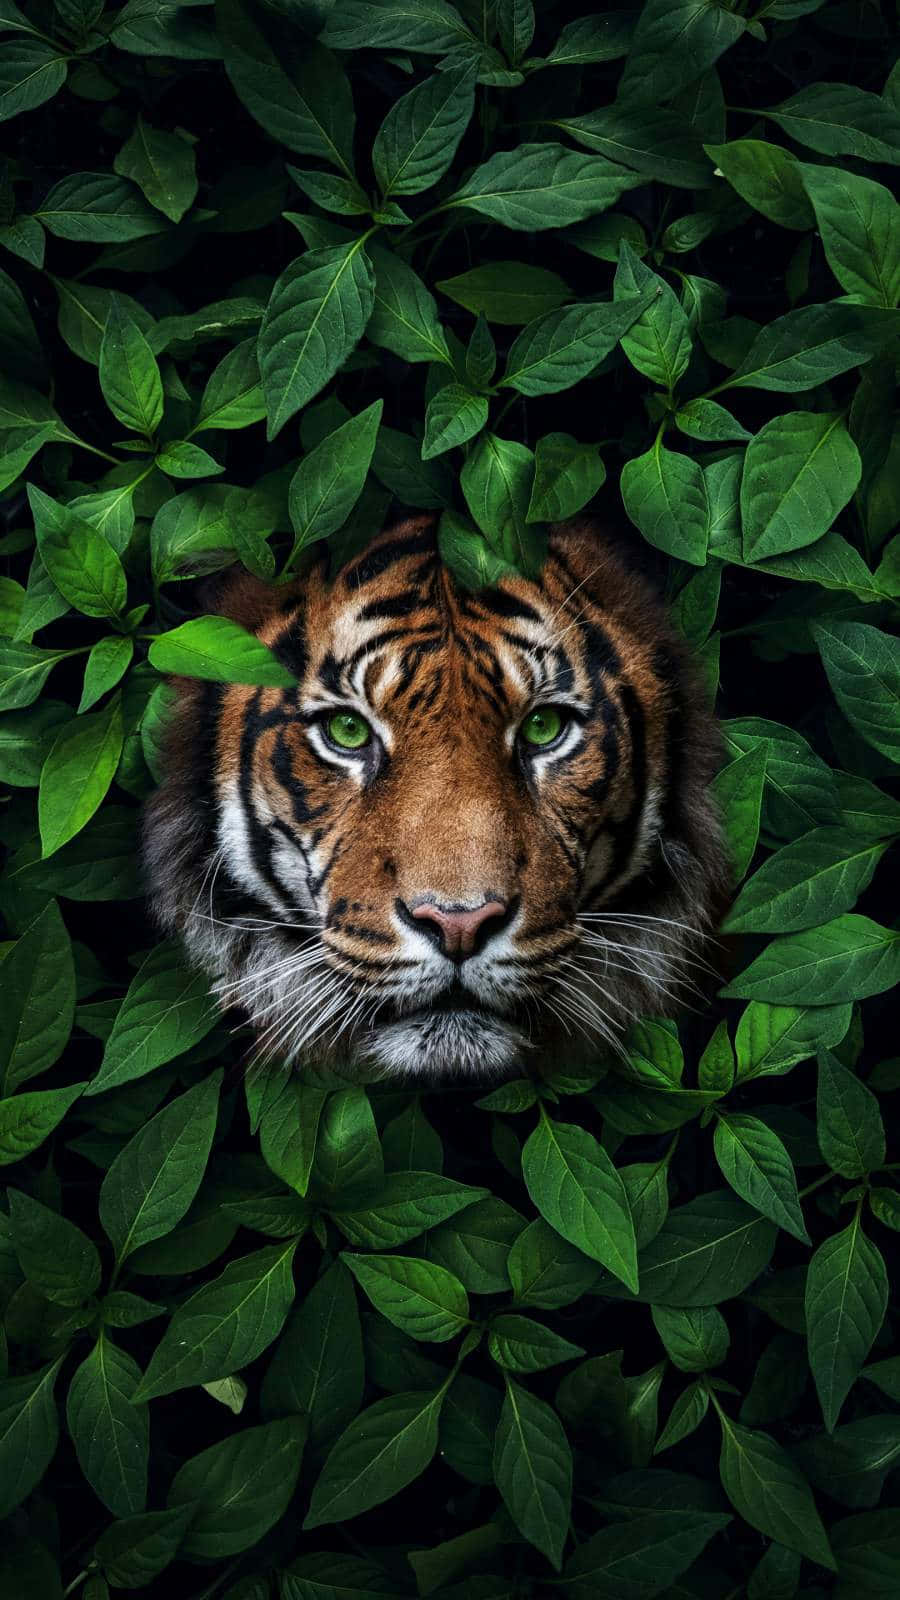 Tiger With Green Eyes In Bush Wallpaper